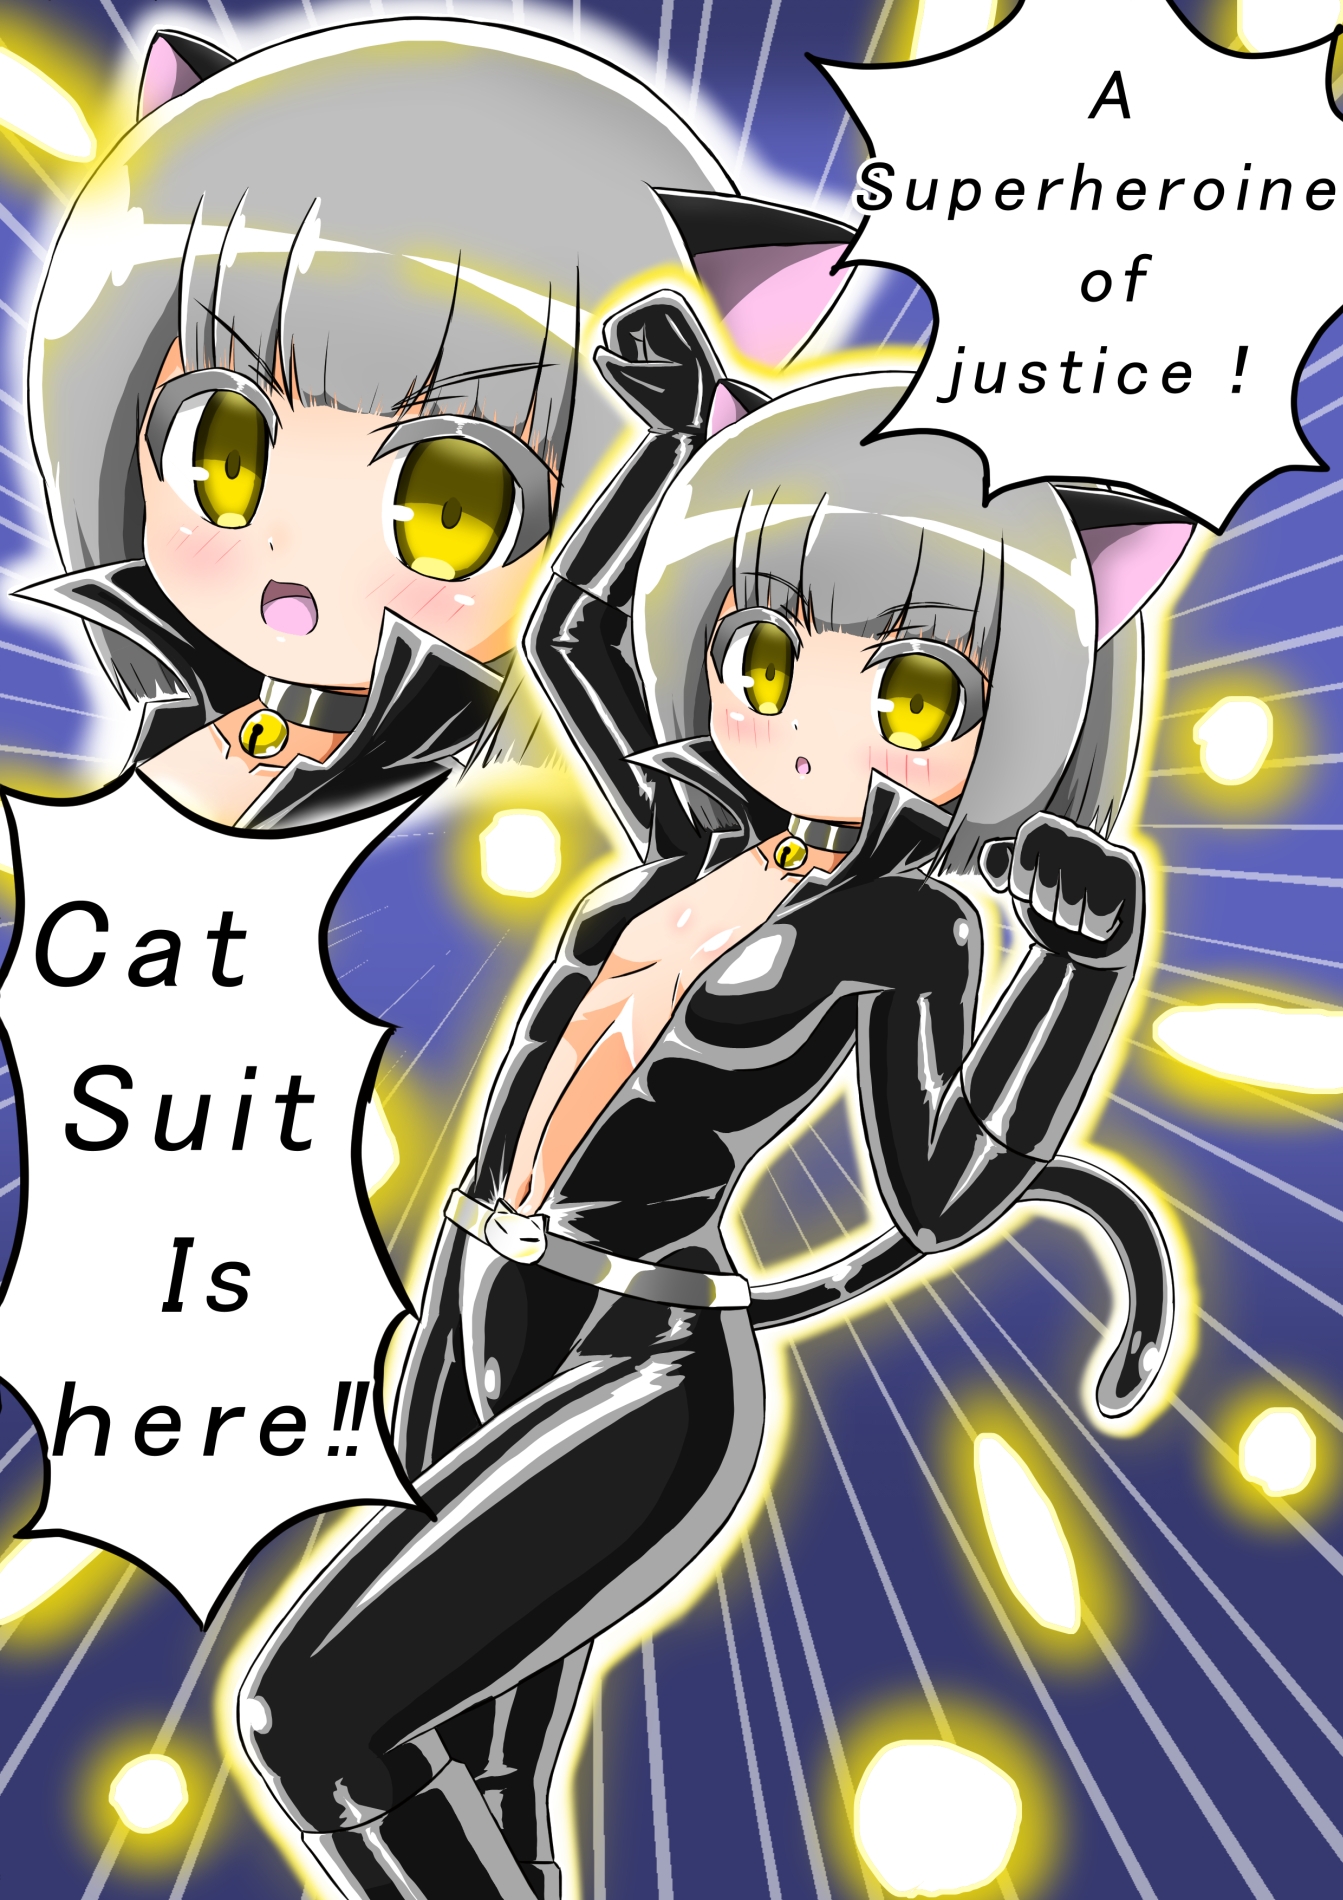 Defeated brainwashed heroine Cat Suit [バルっくす]